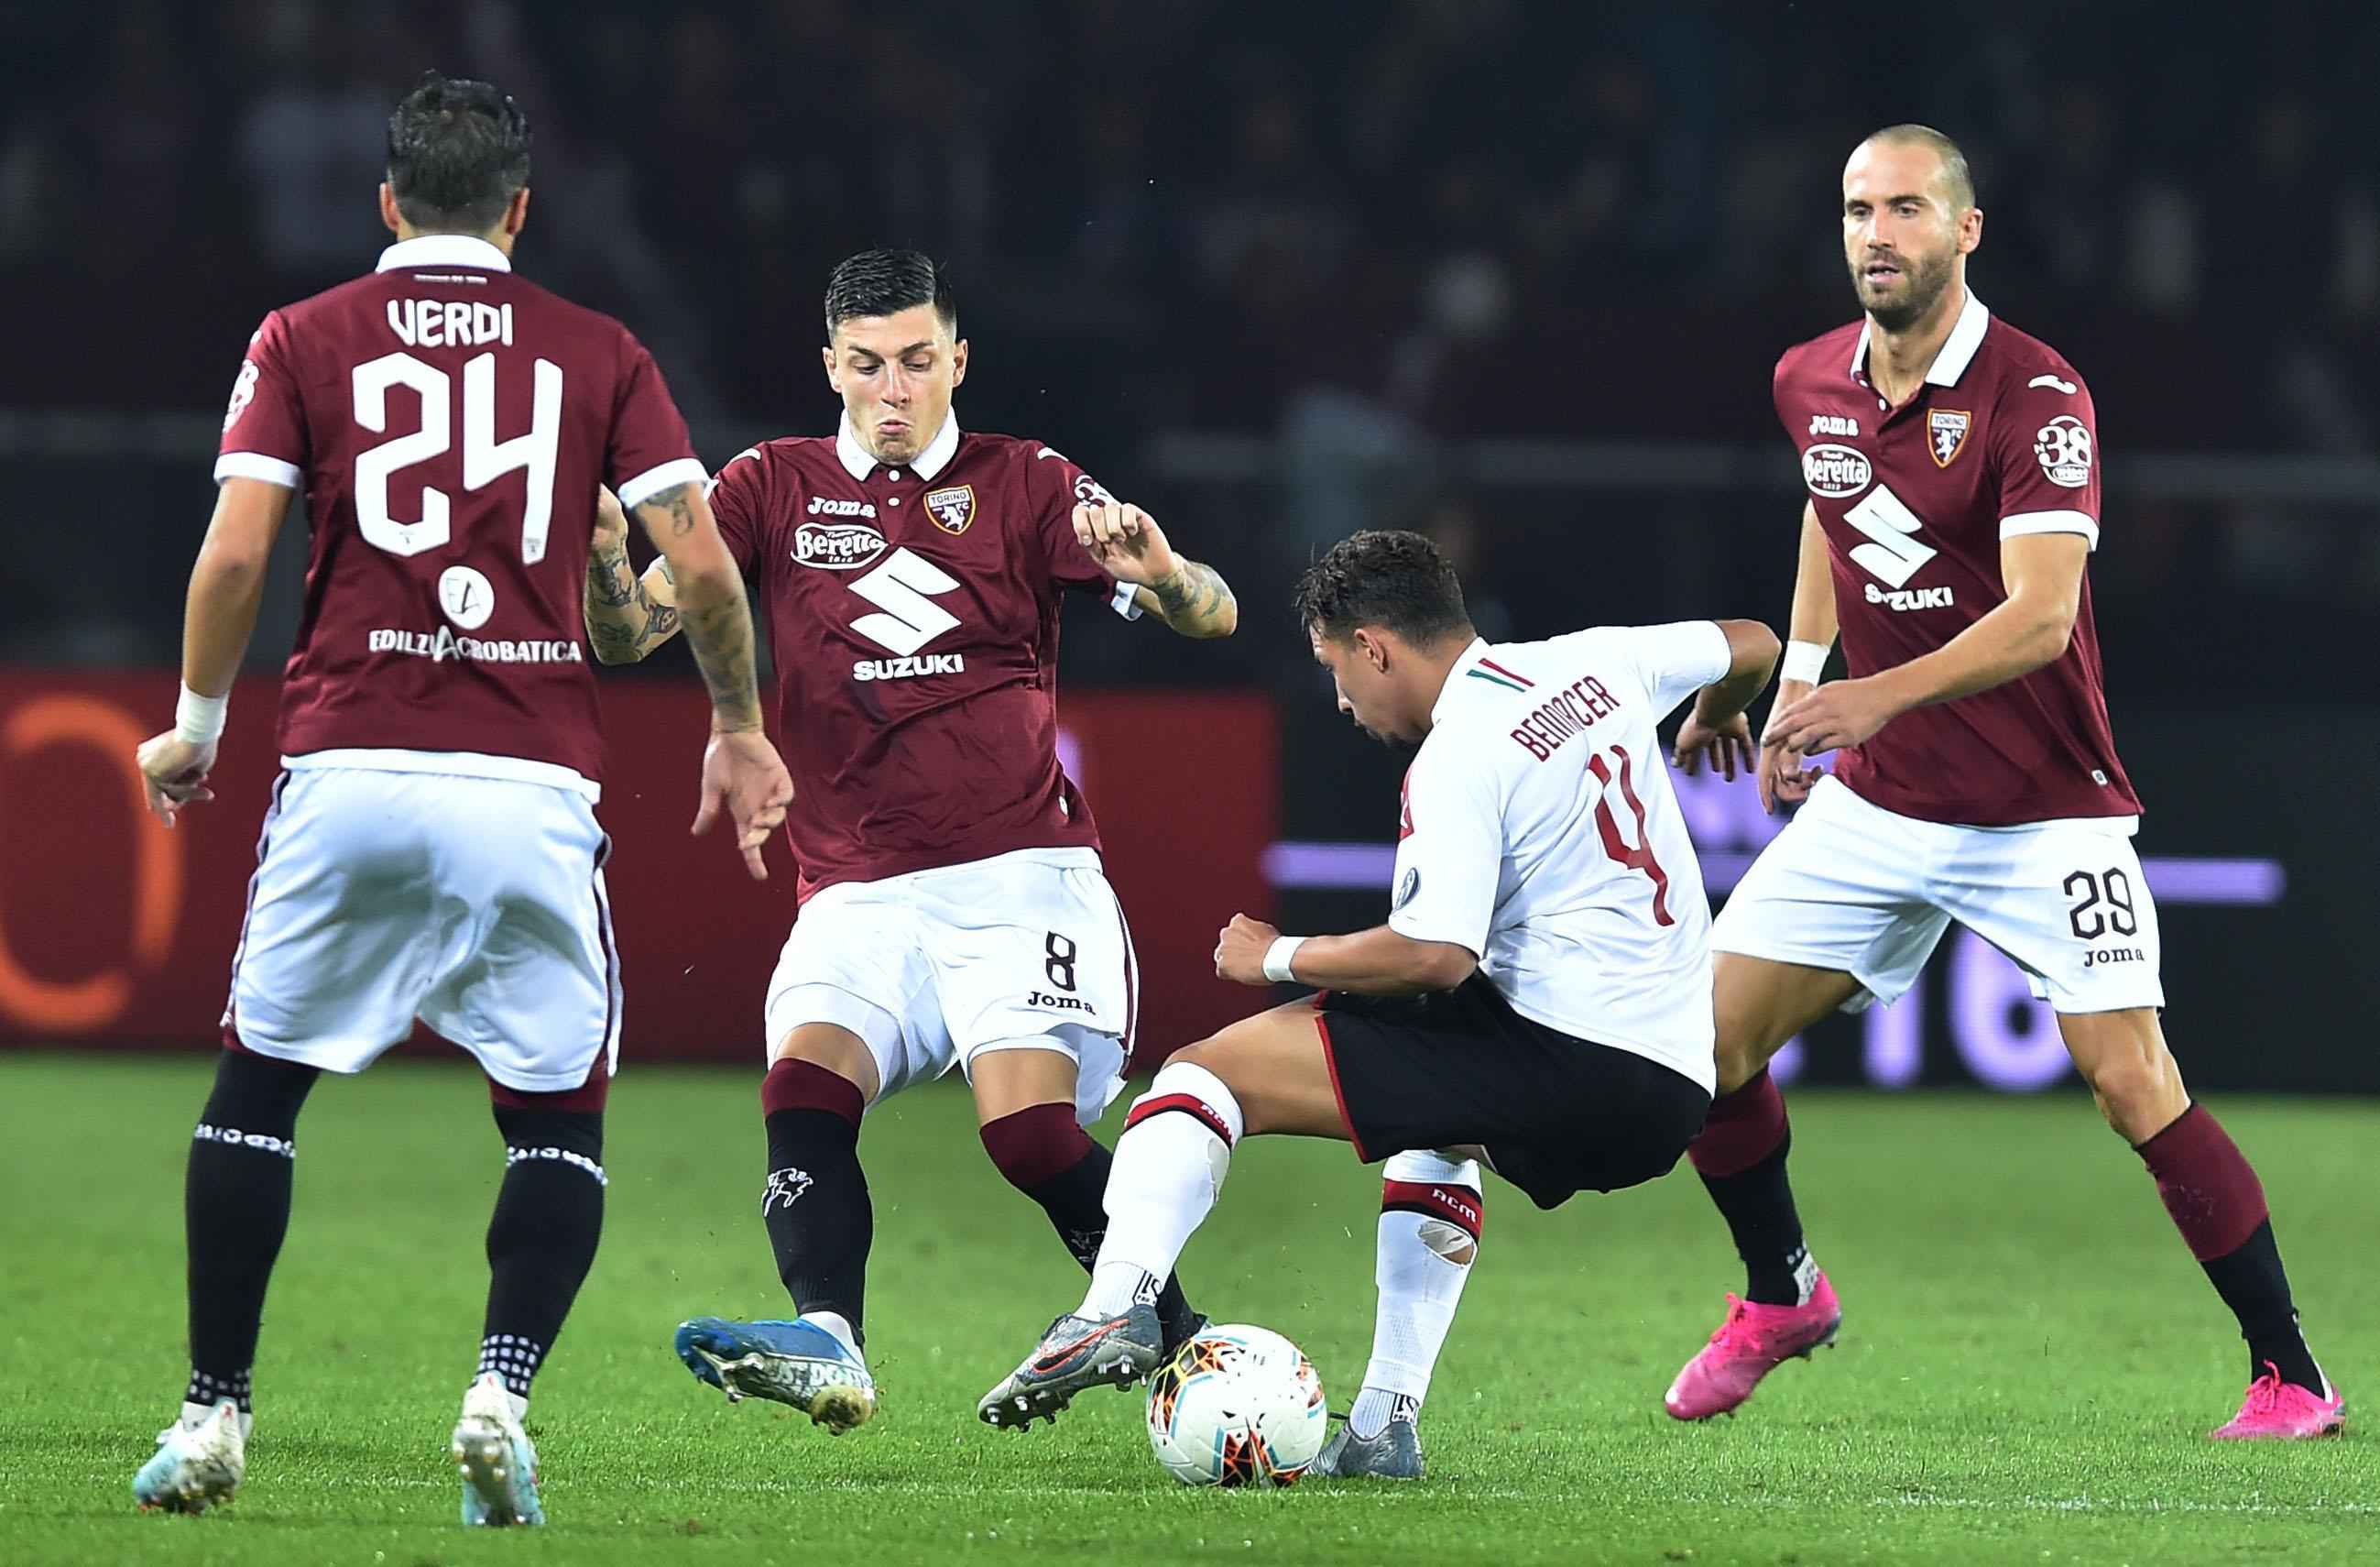 epa07872069 Milan's Ismael Bennacer (C) is challenged by Torino's Daniele Baselli, Simone Verdi (L) and Lorenzo De Silvestri (R) during the Italian Serie A soccer match between Torino FC and AC Milan at the Olimpico Grande Torino stadium in Turin, Italy, 26 September 2019.  EPA/ALESSANDRO DI MARCO